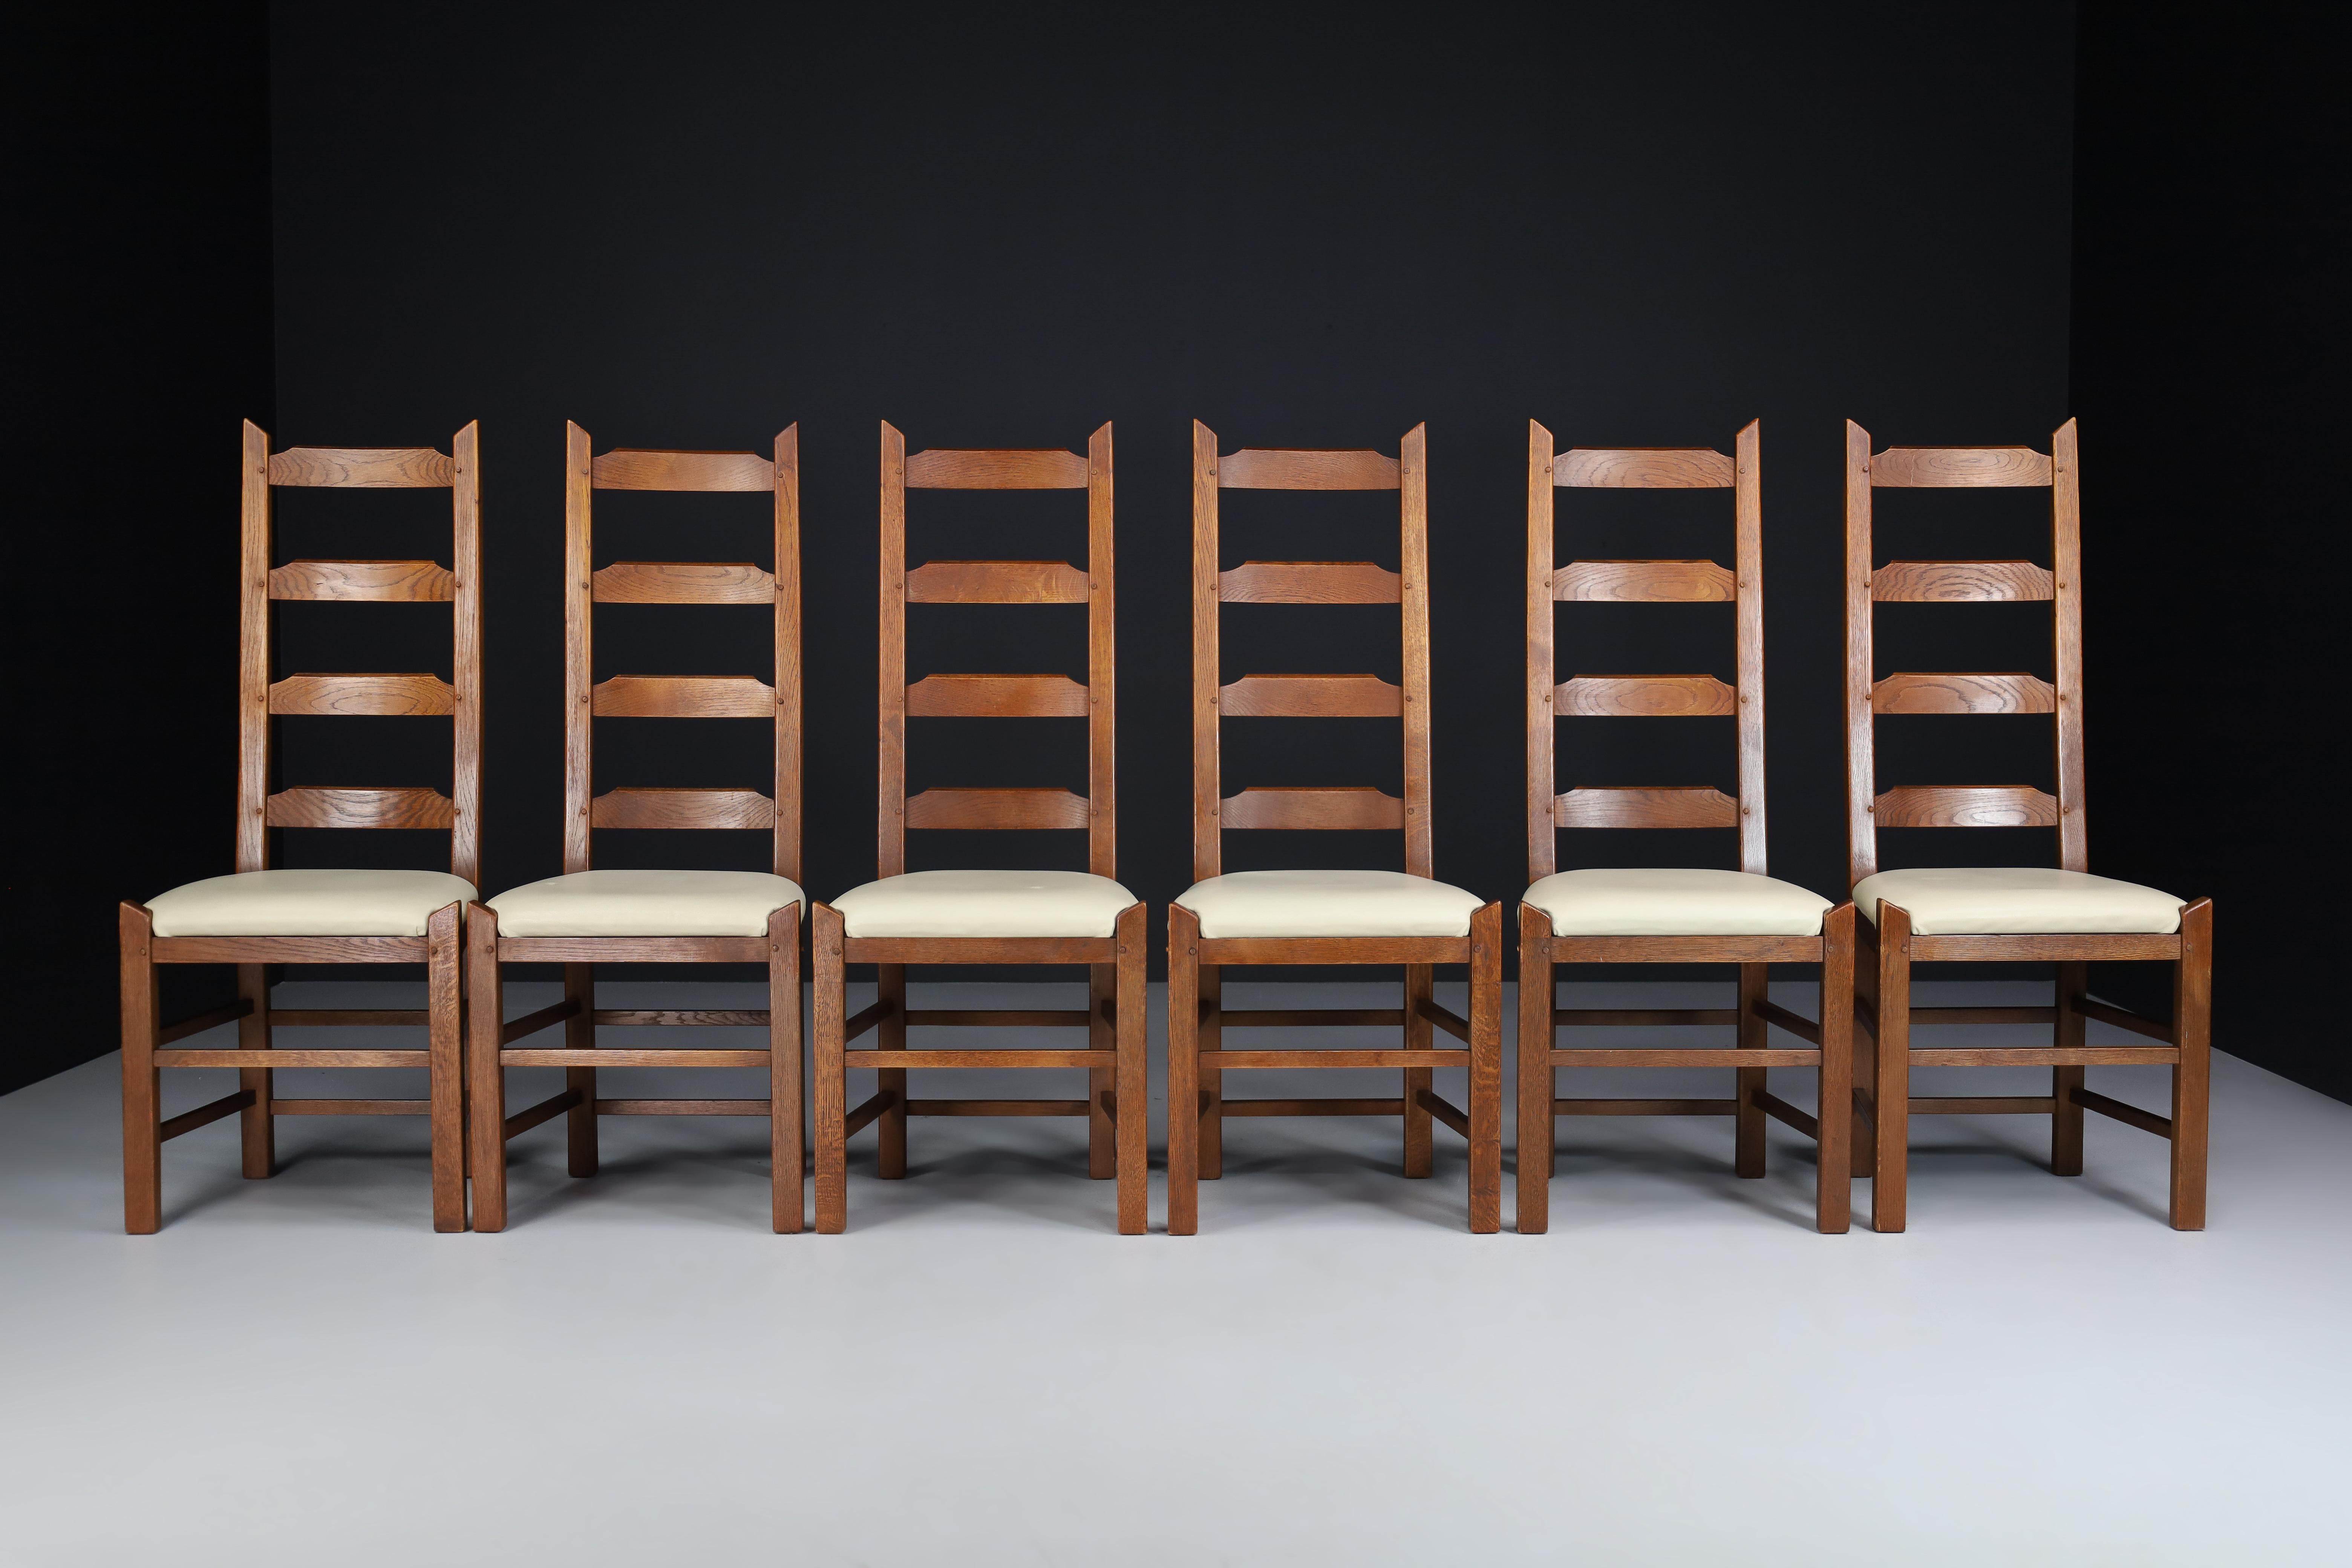 Ladder back chairs crafted in oak and leather seats, France 1950s

These six brutalist chairs were crafted in France circa the 1950s. Each chair is made of solid oak and stands on carved rustic legs embellished with a leather seat. Each chair has a